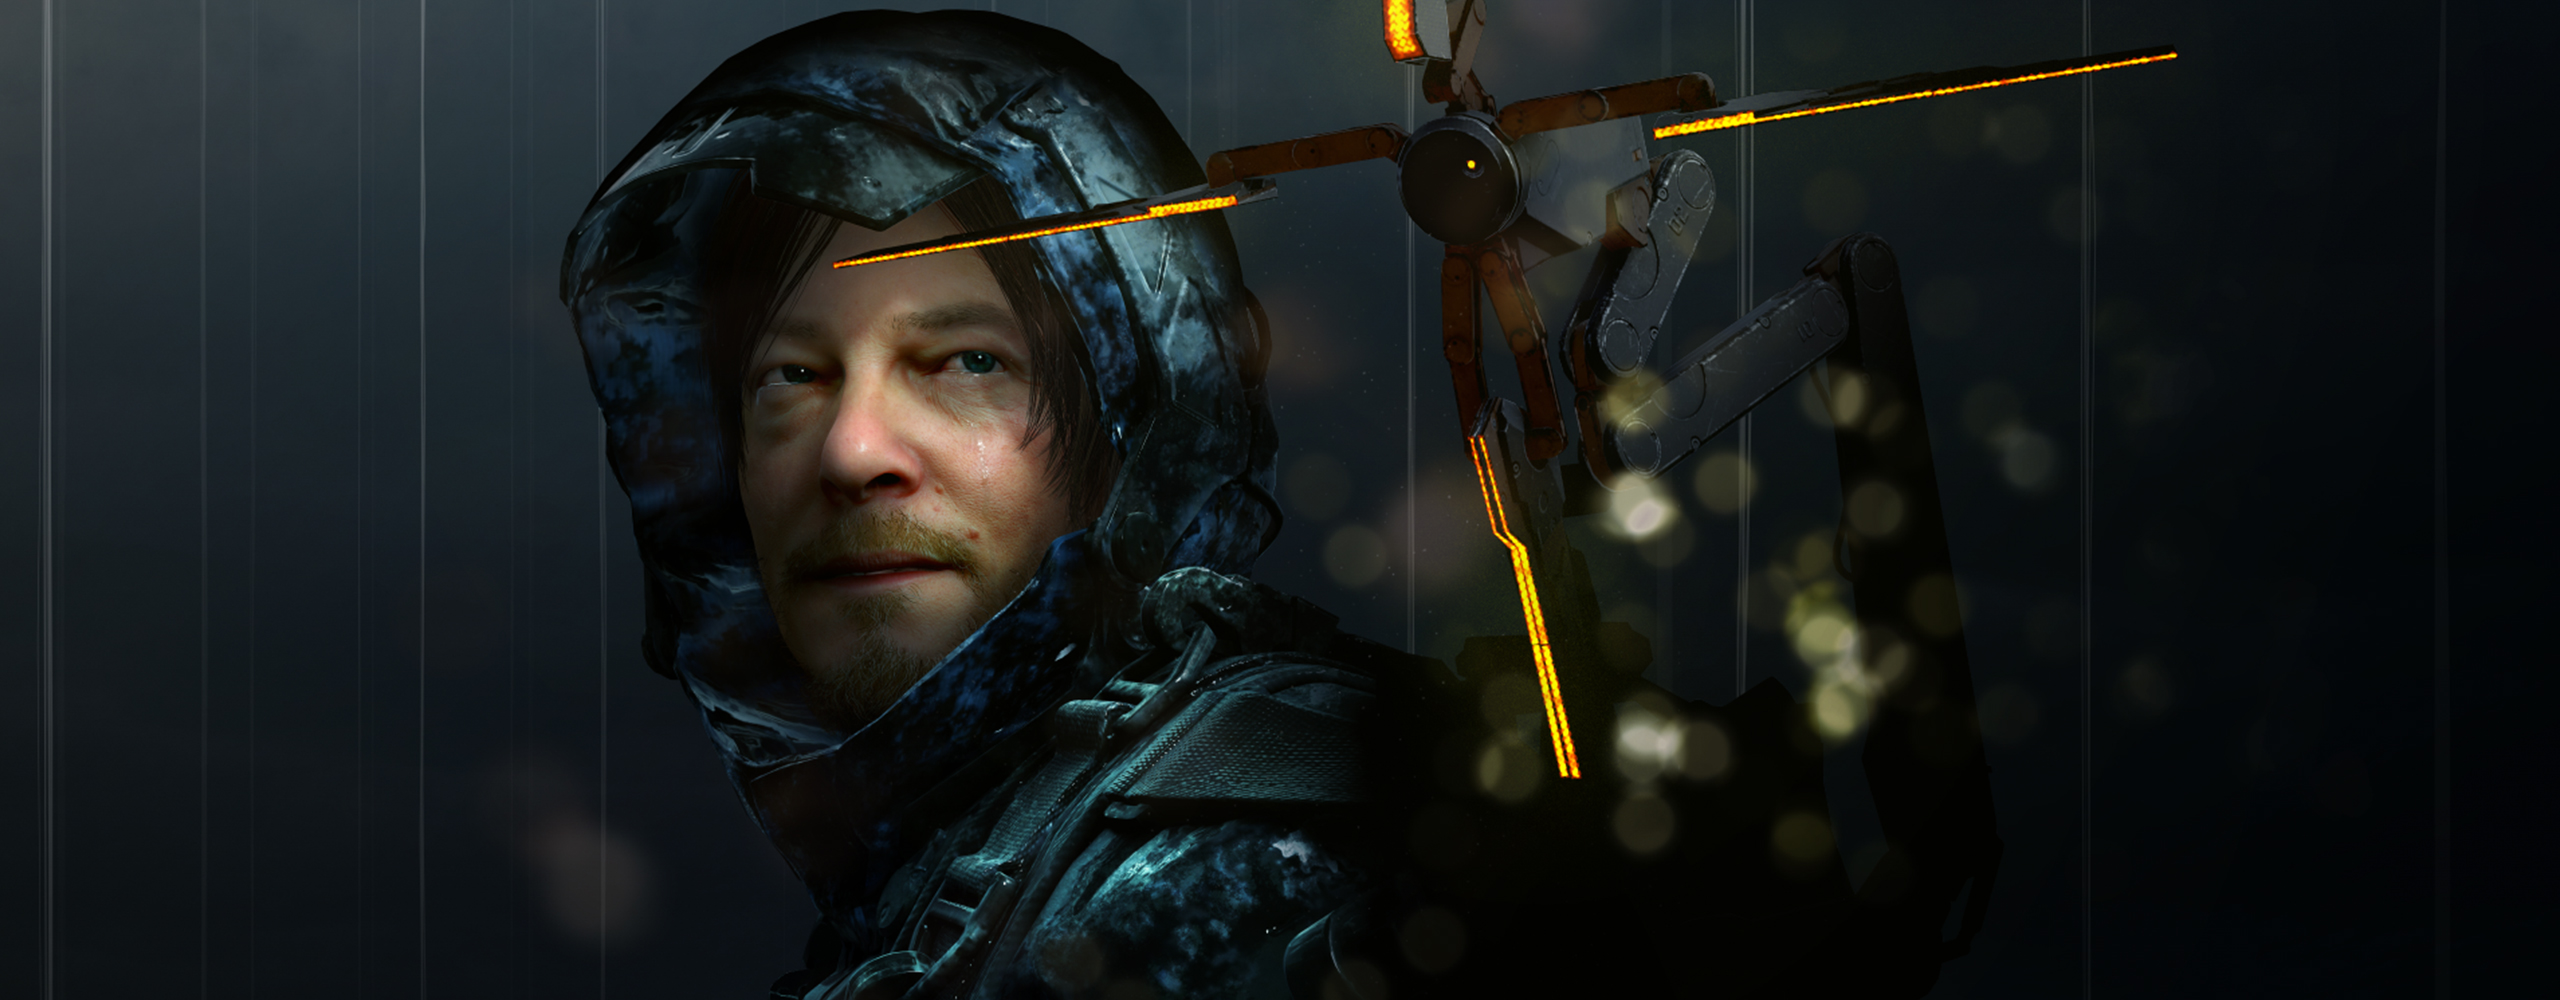 DEATH STRANDING IS COMING TO PC GAME PASS